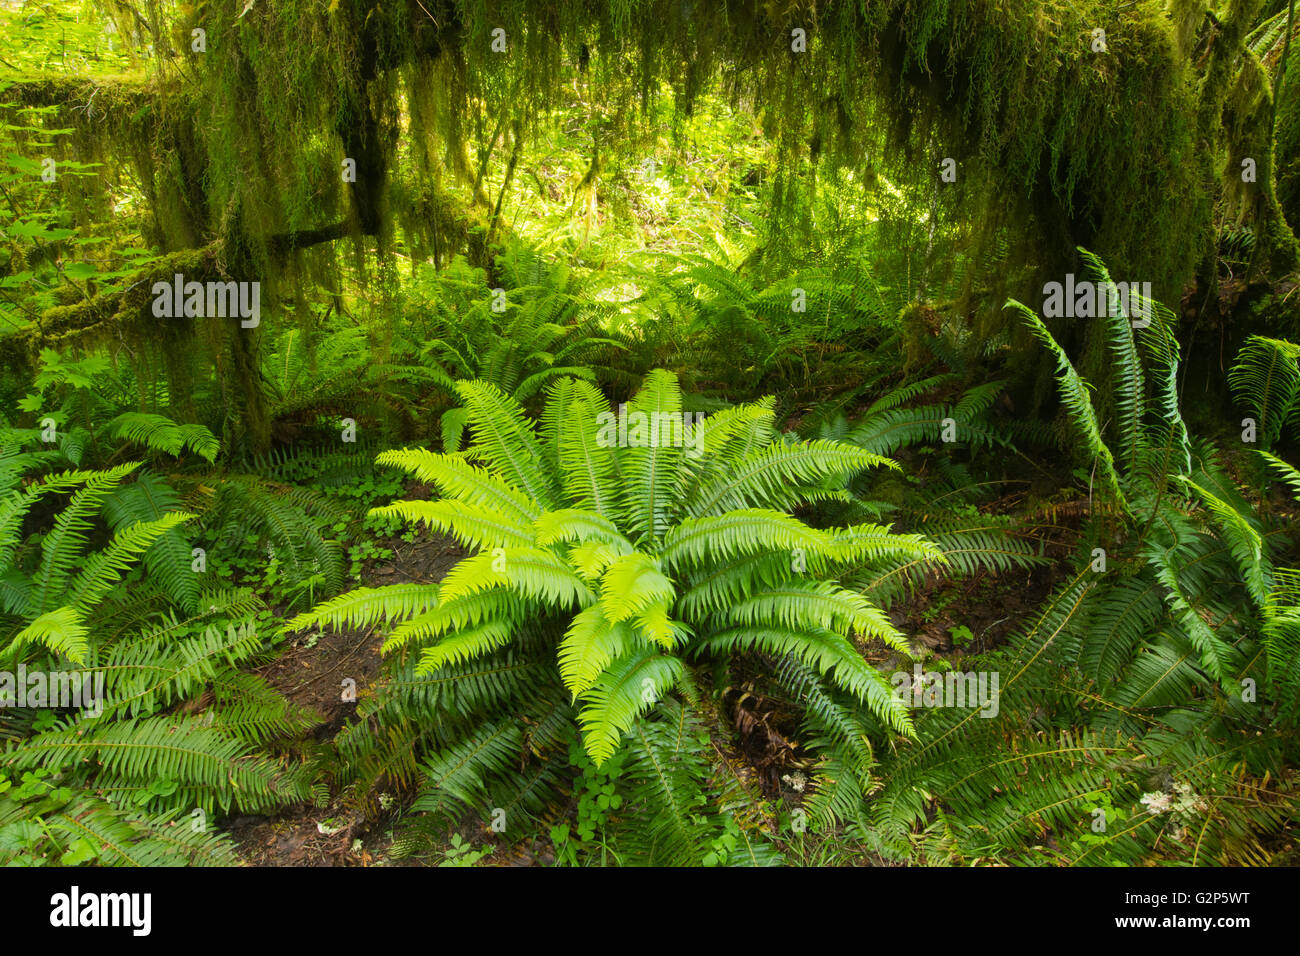 Sword ferns and moss-covered Vine Maple, Hall of Mosses, Hoh river valley, Olympic National Park, Washington, May Stock Photo